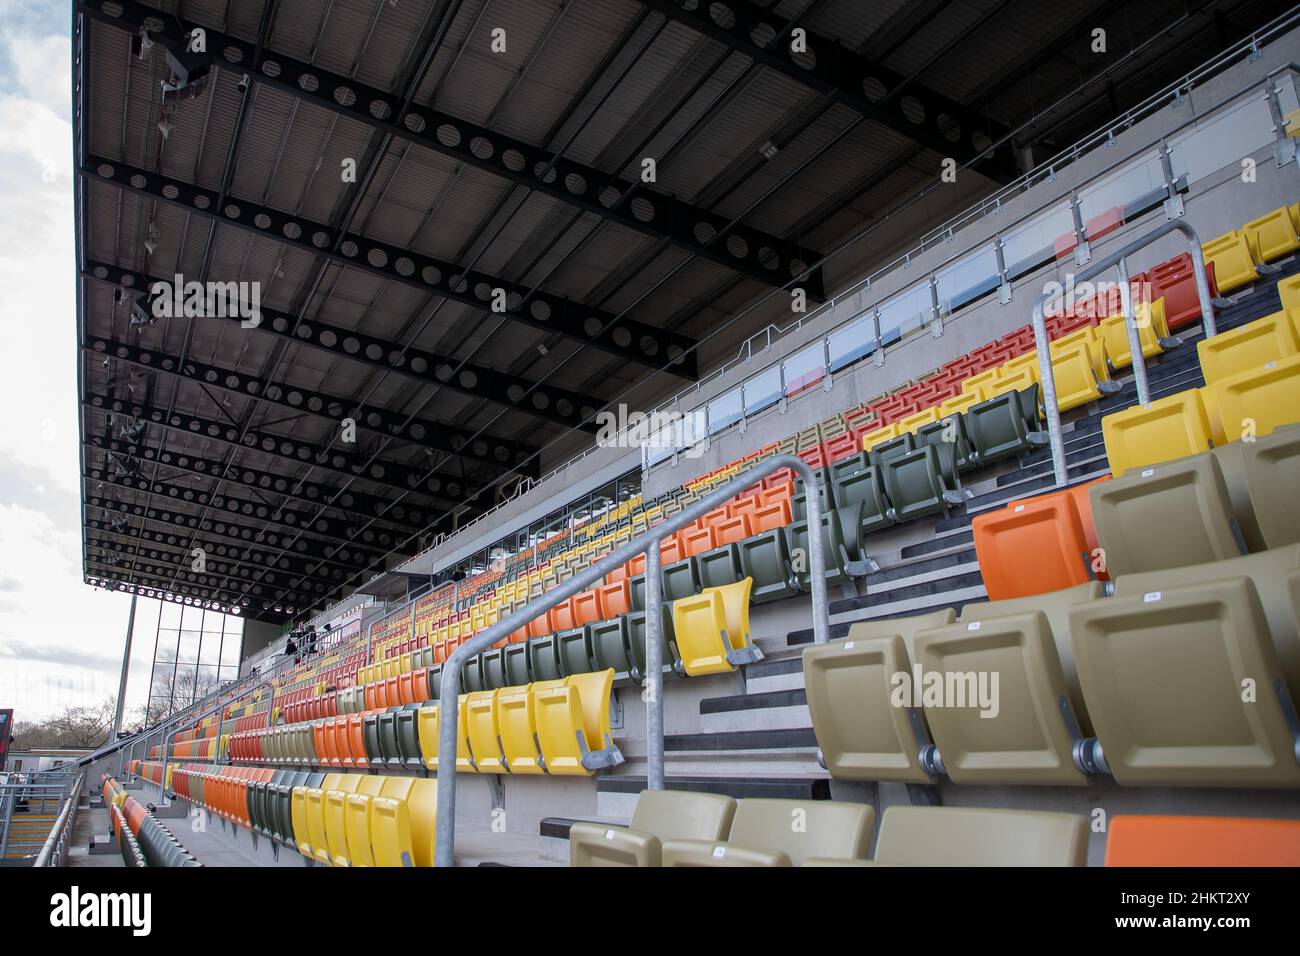 Barnet, United Kingdom. 05th Feb, 2022. Gallagher Premiership Rugby. Saracens V Bath Rugby. StoneX Stadium. Barnet. The New West Stand is open for fans for the first time during the Gallagher Premiership rugby match between Saracens and Bath Rugby. Credit: Sport In Pictures/Alamy Live News Stock Photo